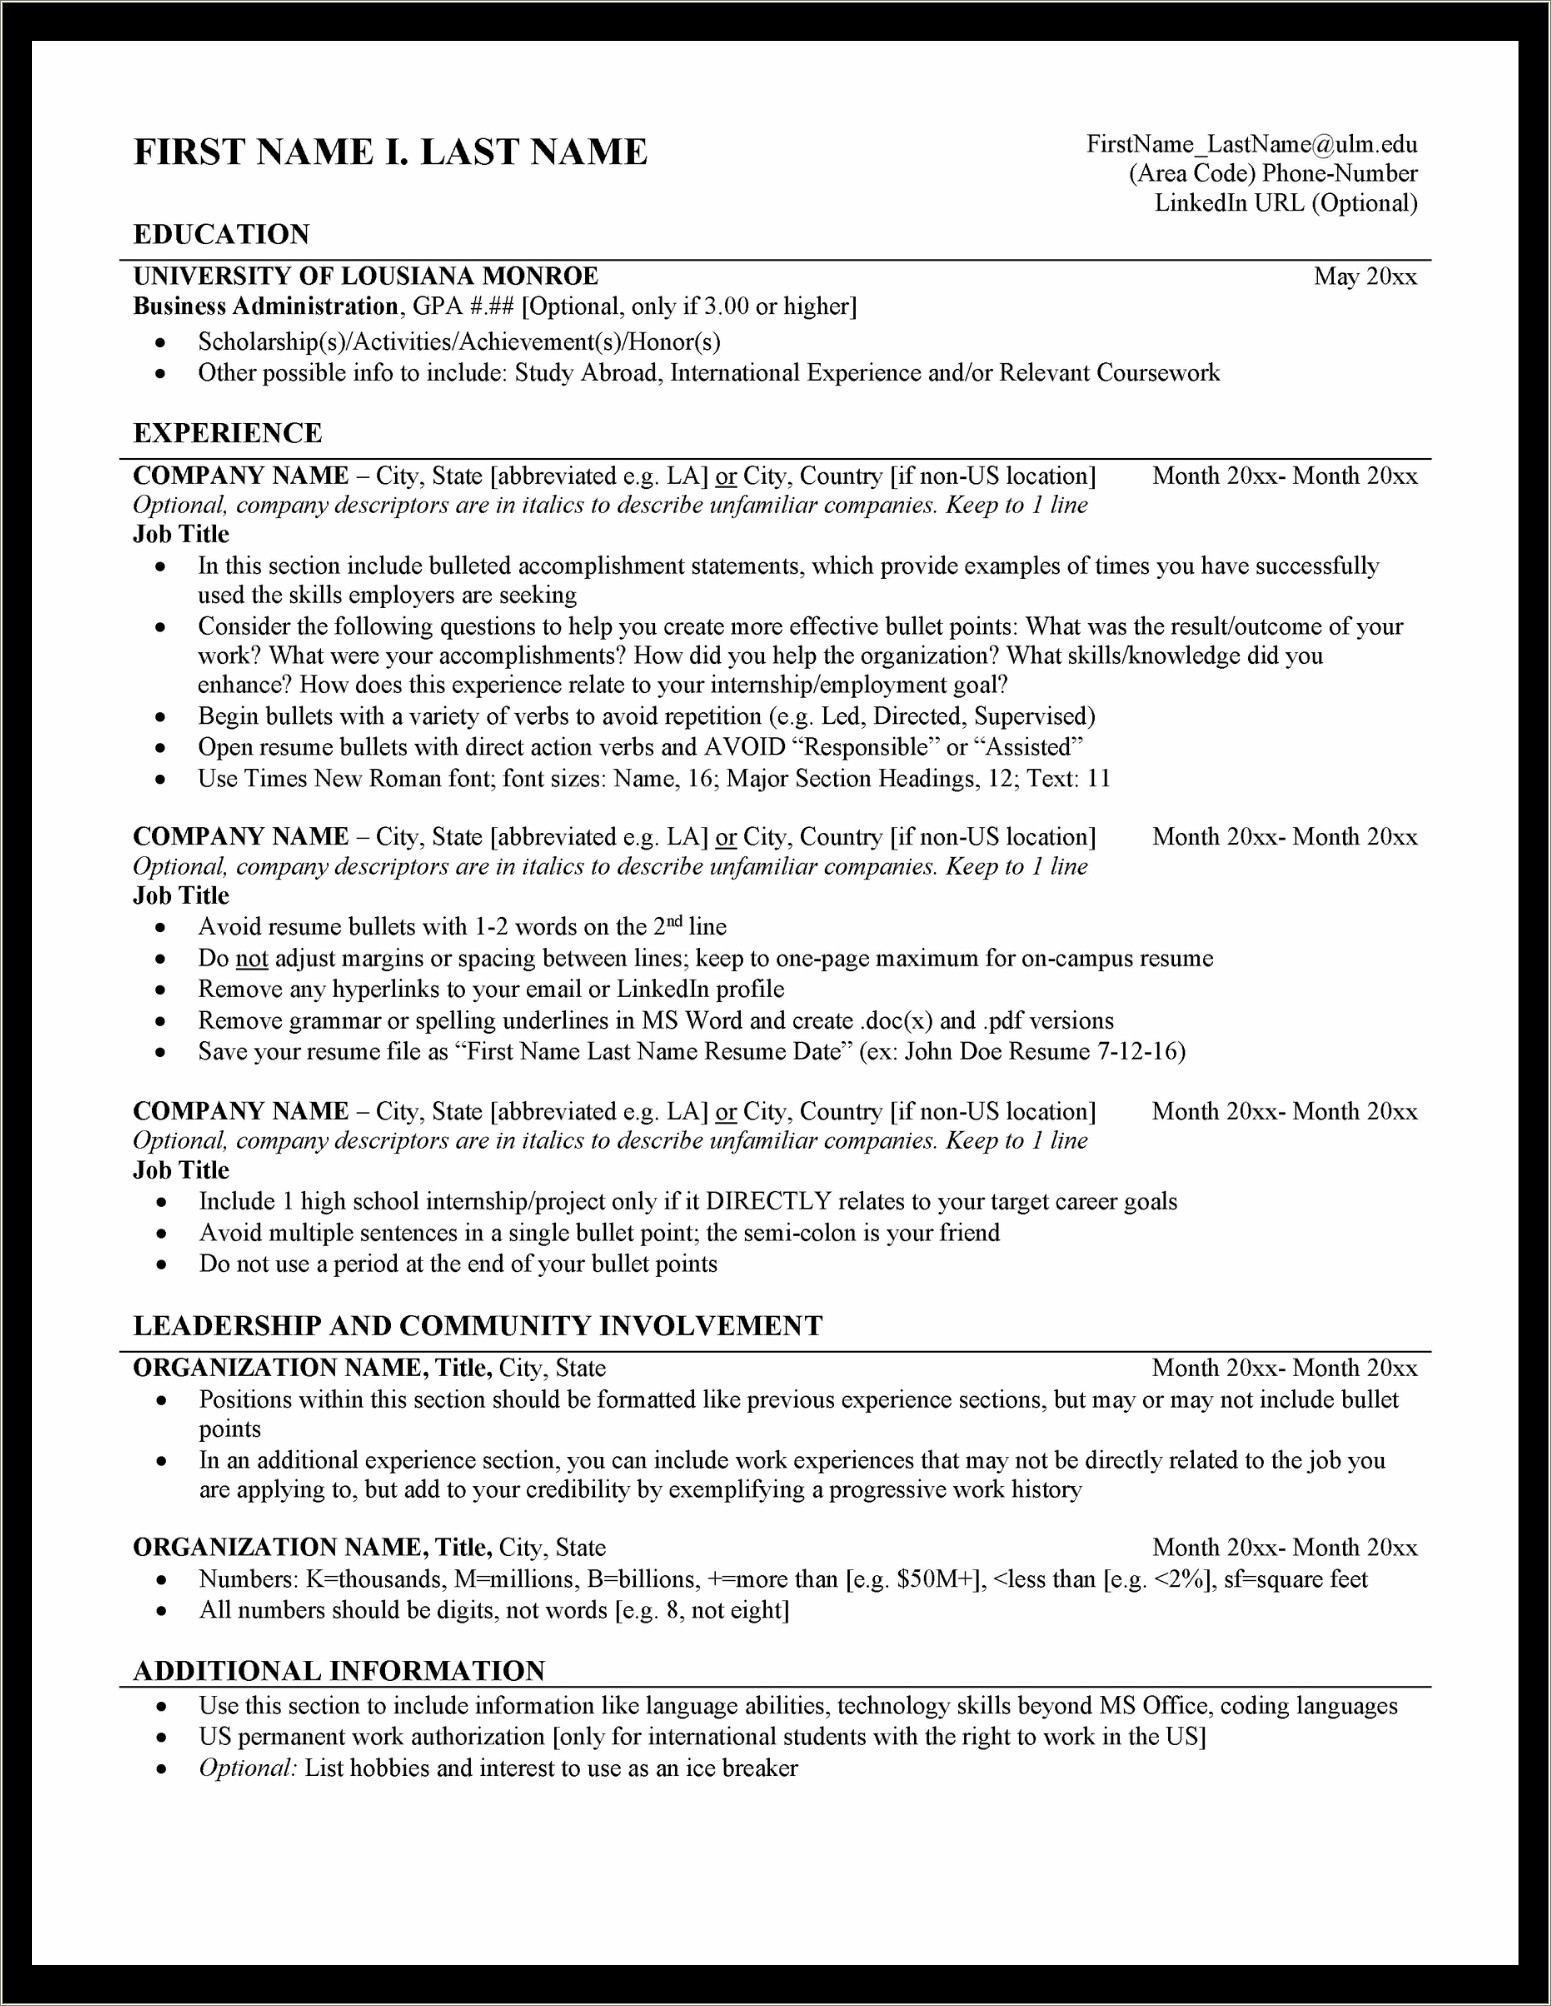 Resume Examples With Relevant Coursework Sections Pdf